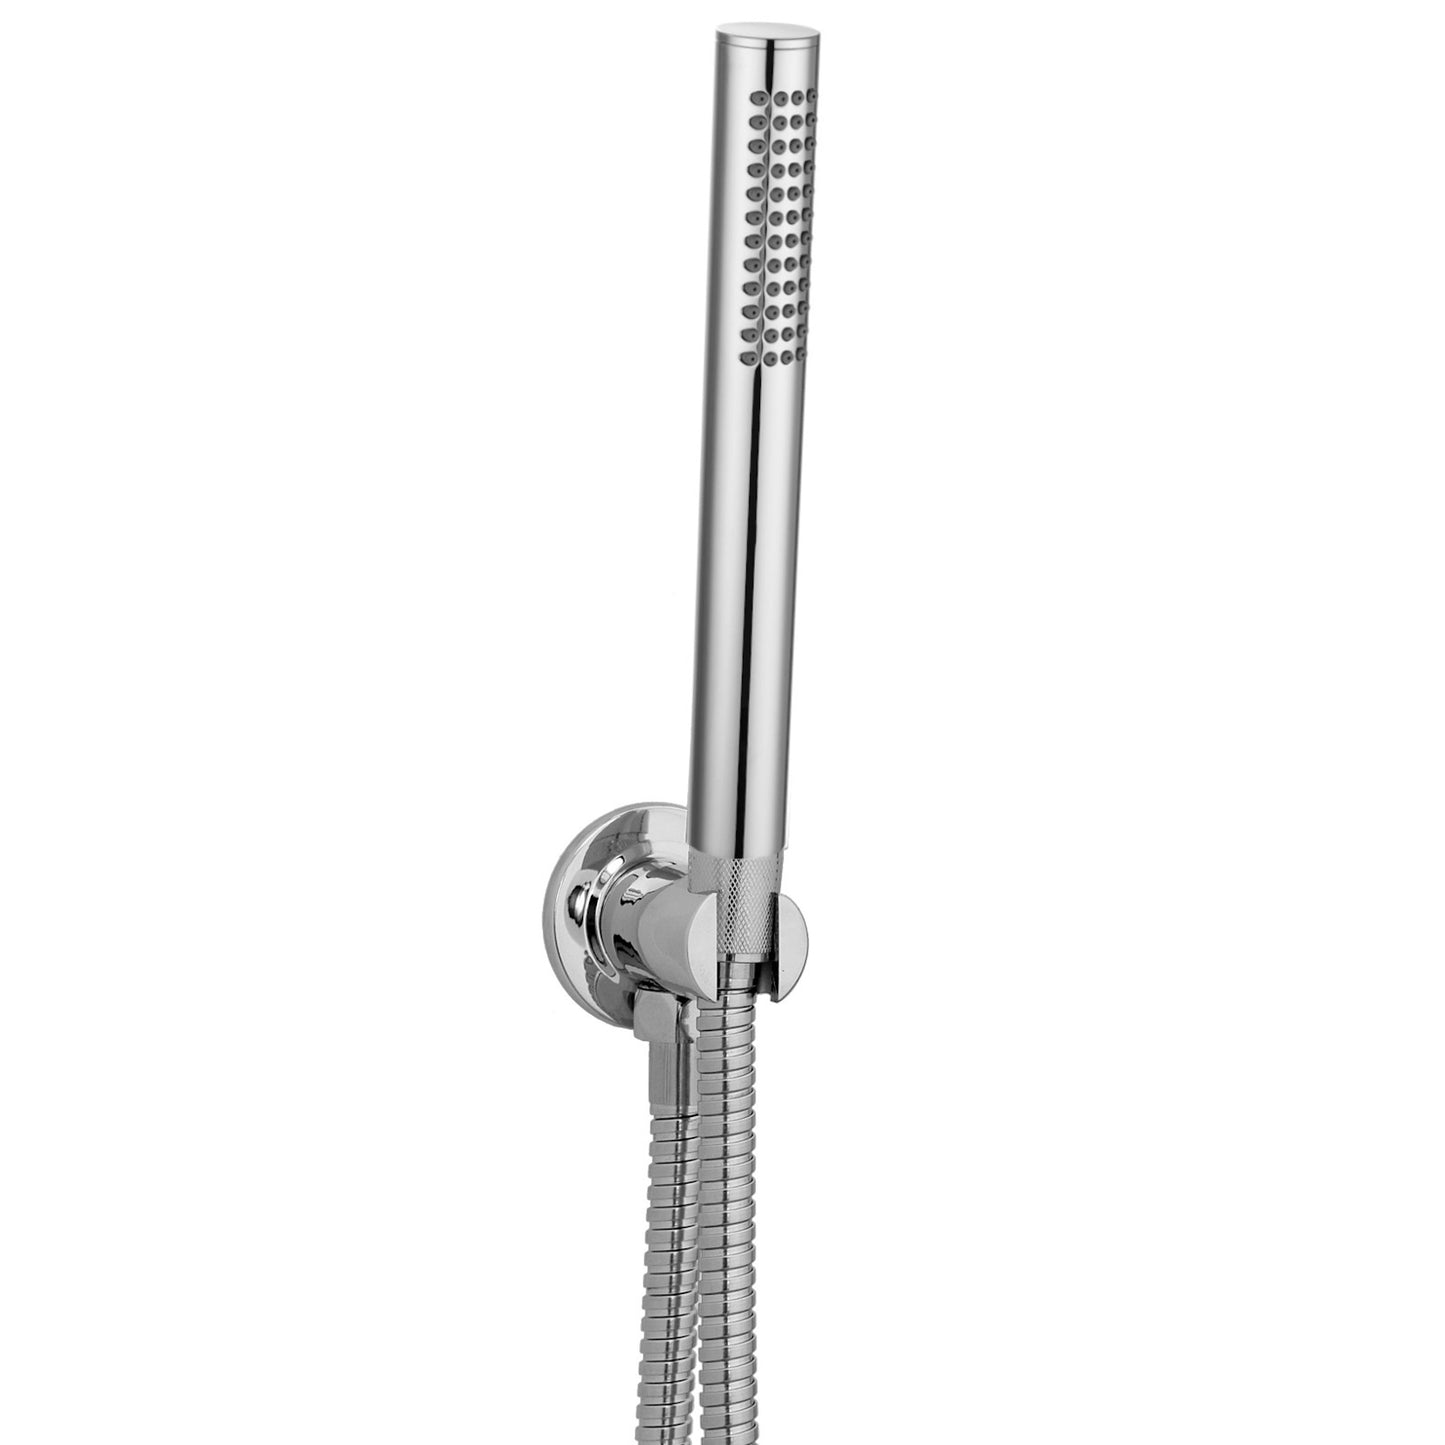 Venice Contemporary Round Concealed Thermostatic Shower Set Incl. Triple Diverter Valve, Wall Fixed 8" Shower Head, Handshower Kit, Bath Filler Waste with Overflow - Chrome (3 Outlet)